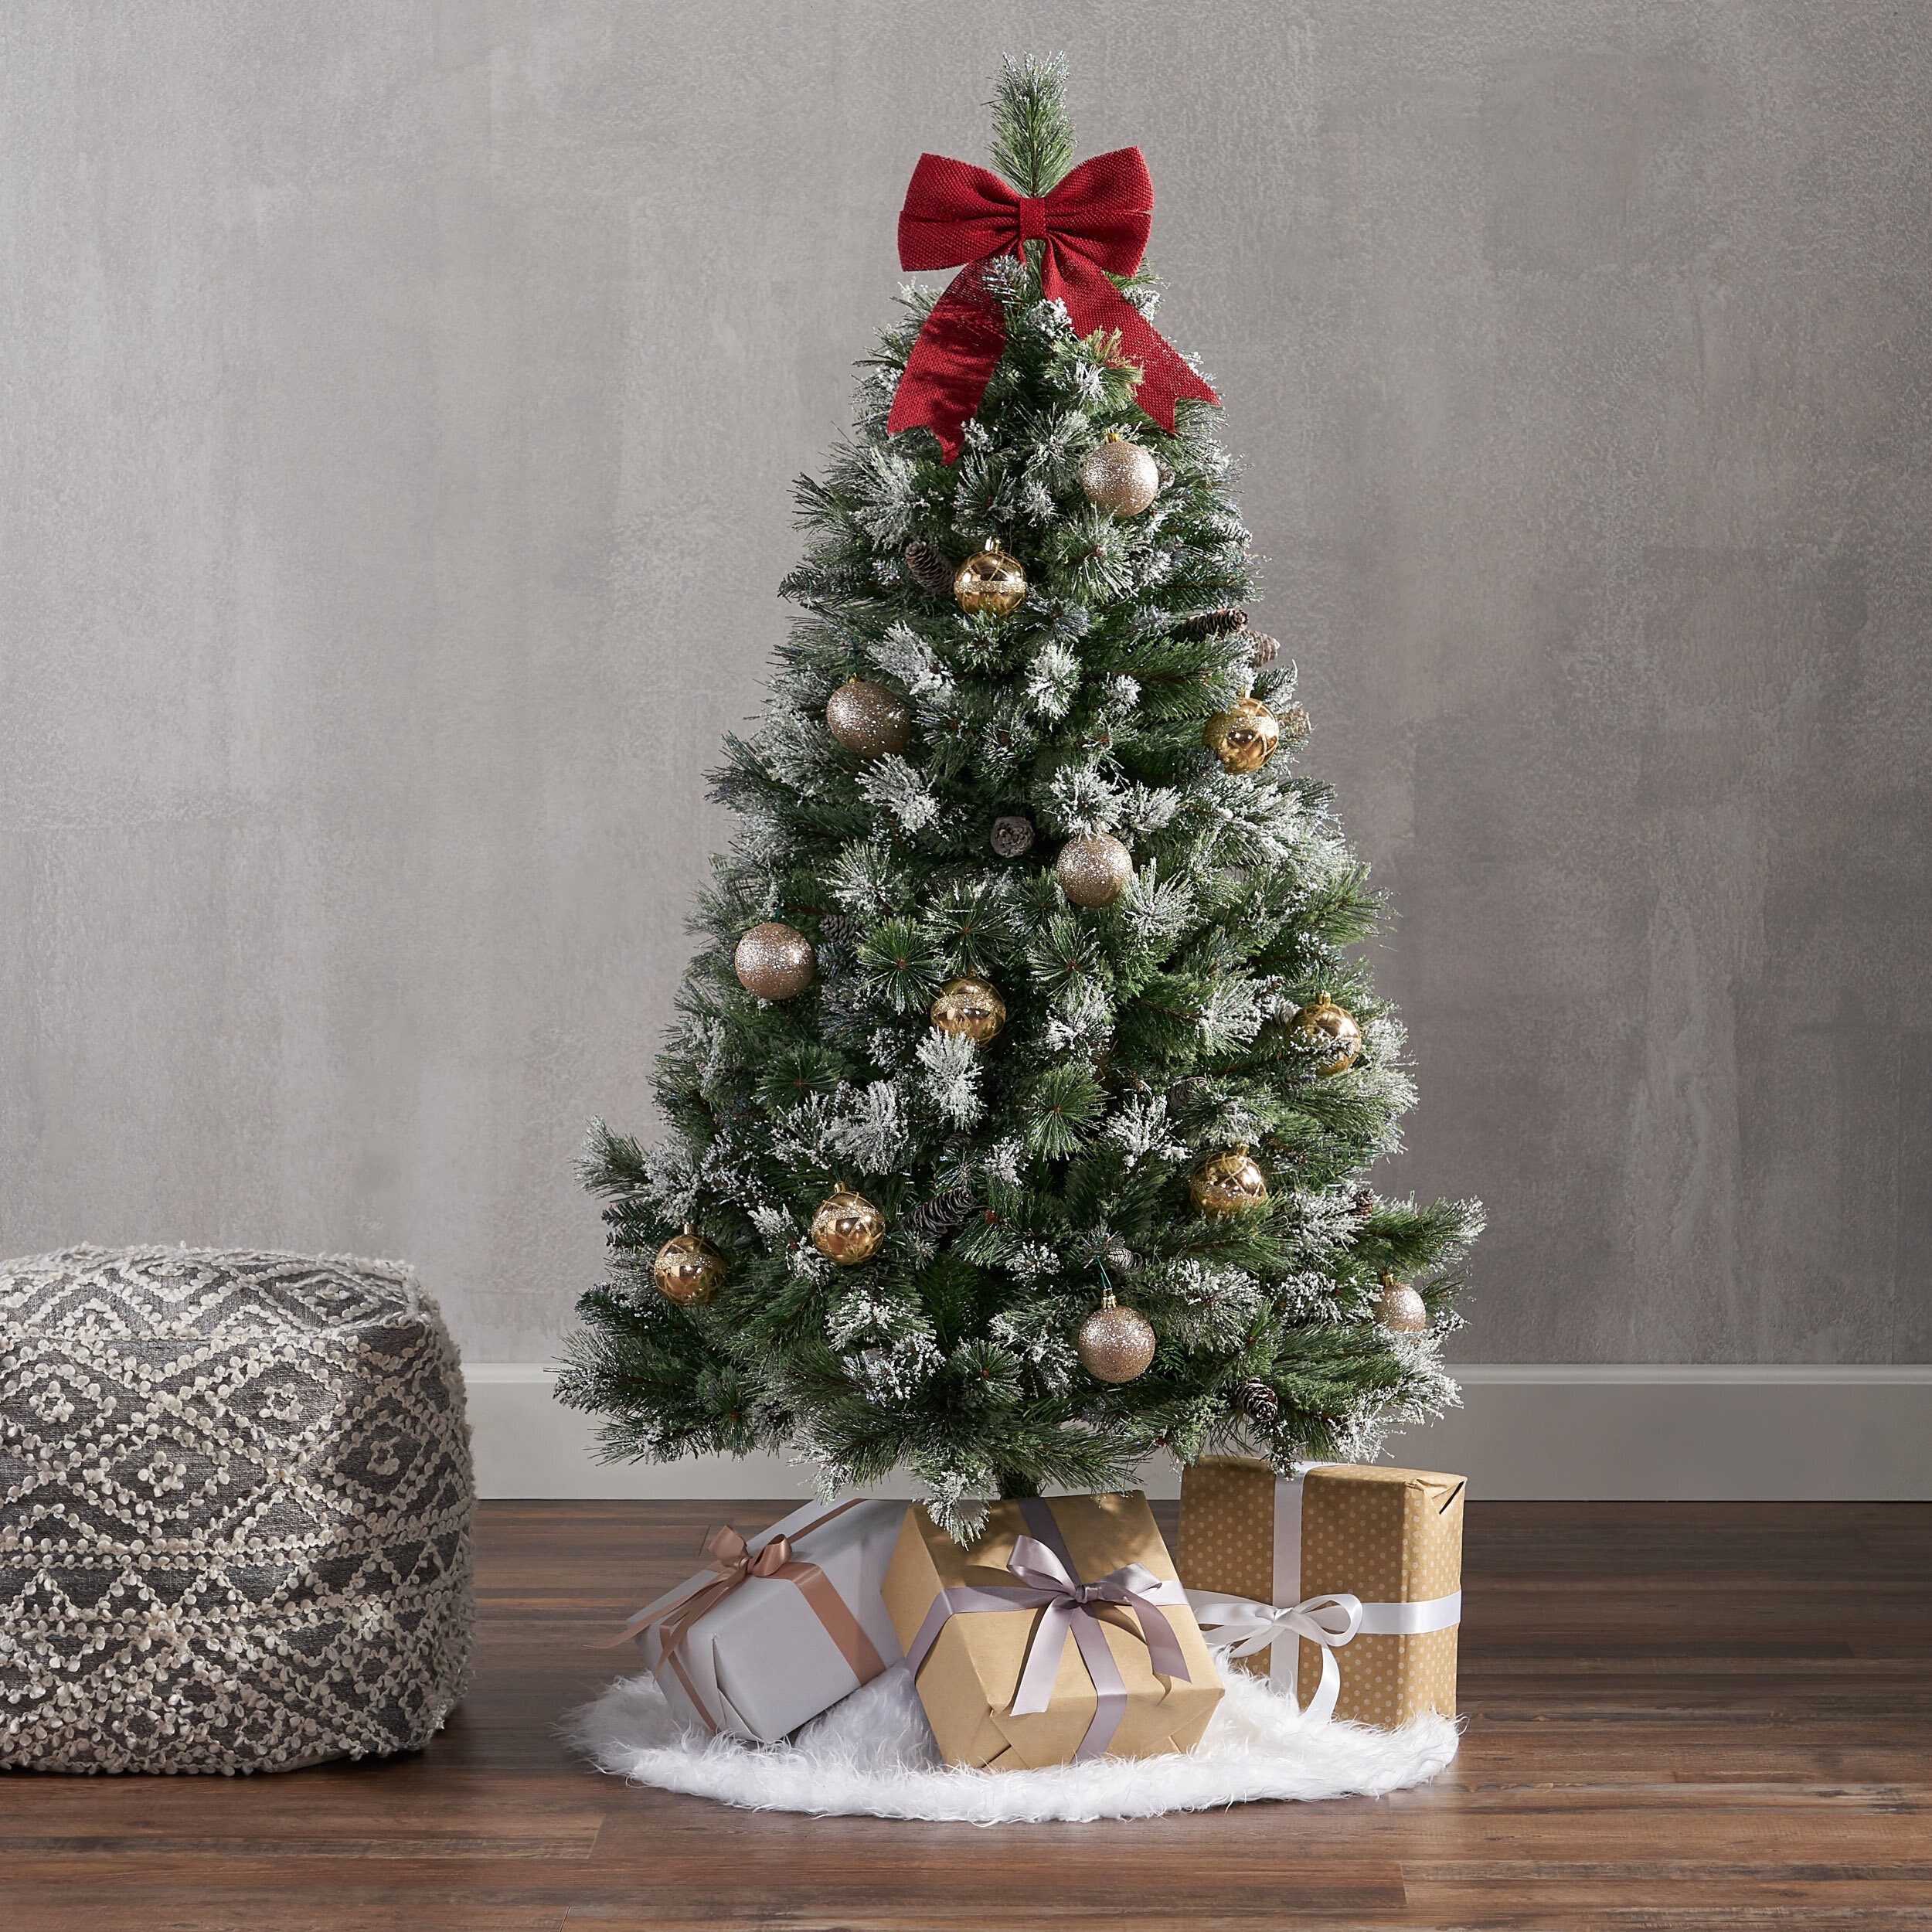 Real Vs. Artificial Christmas Tree - Which One to Choose? - Foter